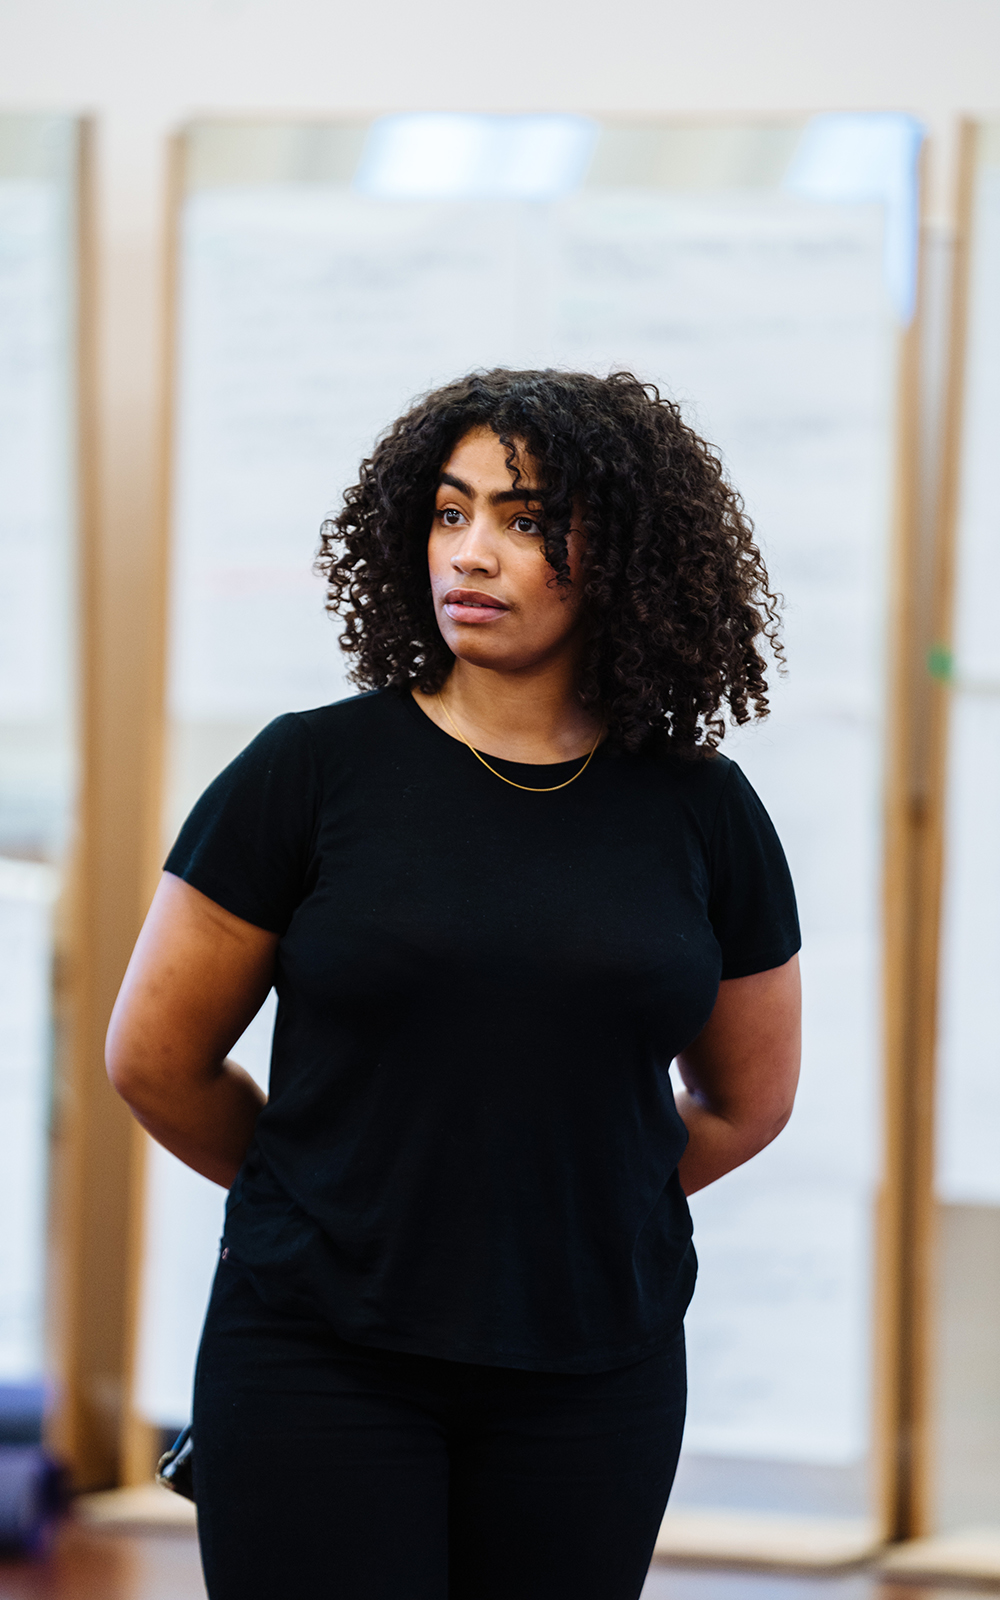 [image] a woman in a black t-shirt stands with her arms crossed behind her back, looking thoughtful to off-camera.